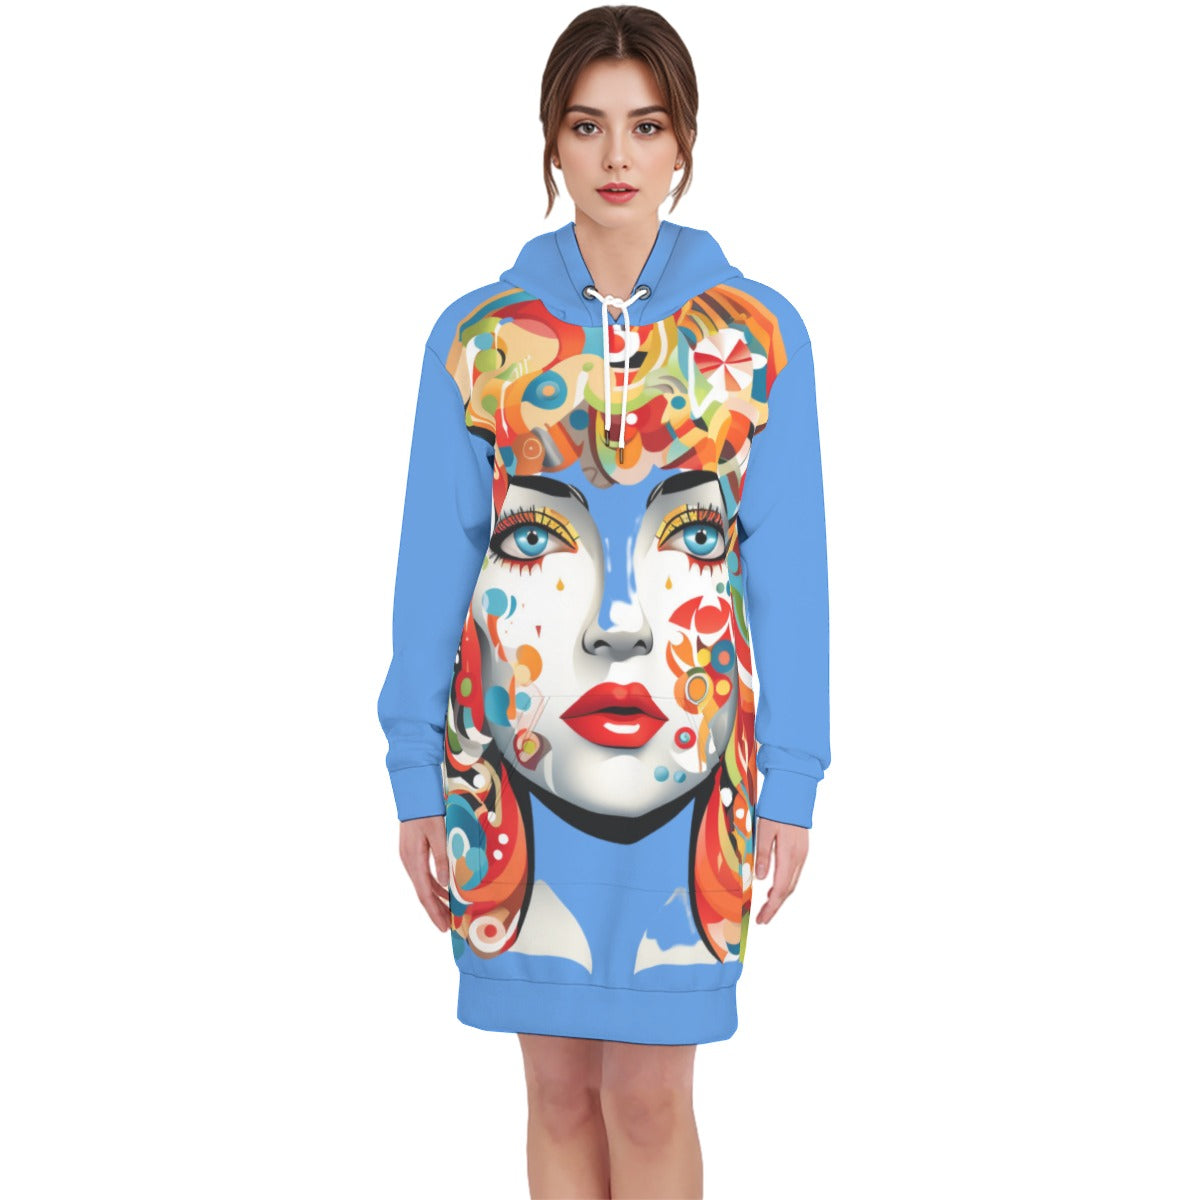 All-Over Print Women's Long Pullover Hoodie|310GMS Cotton